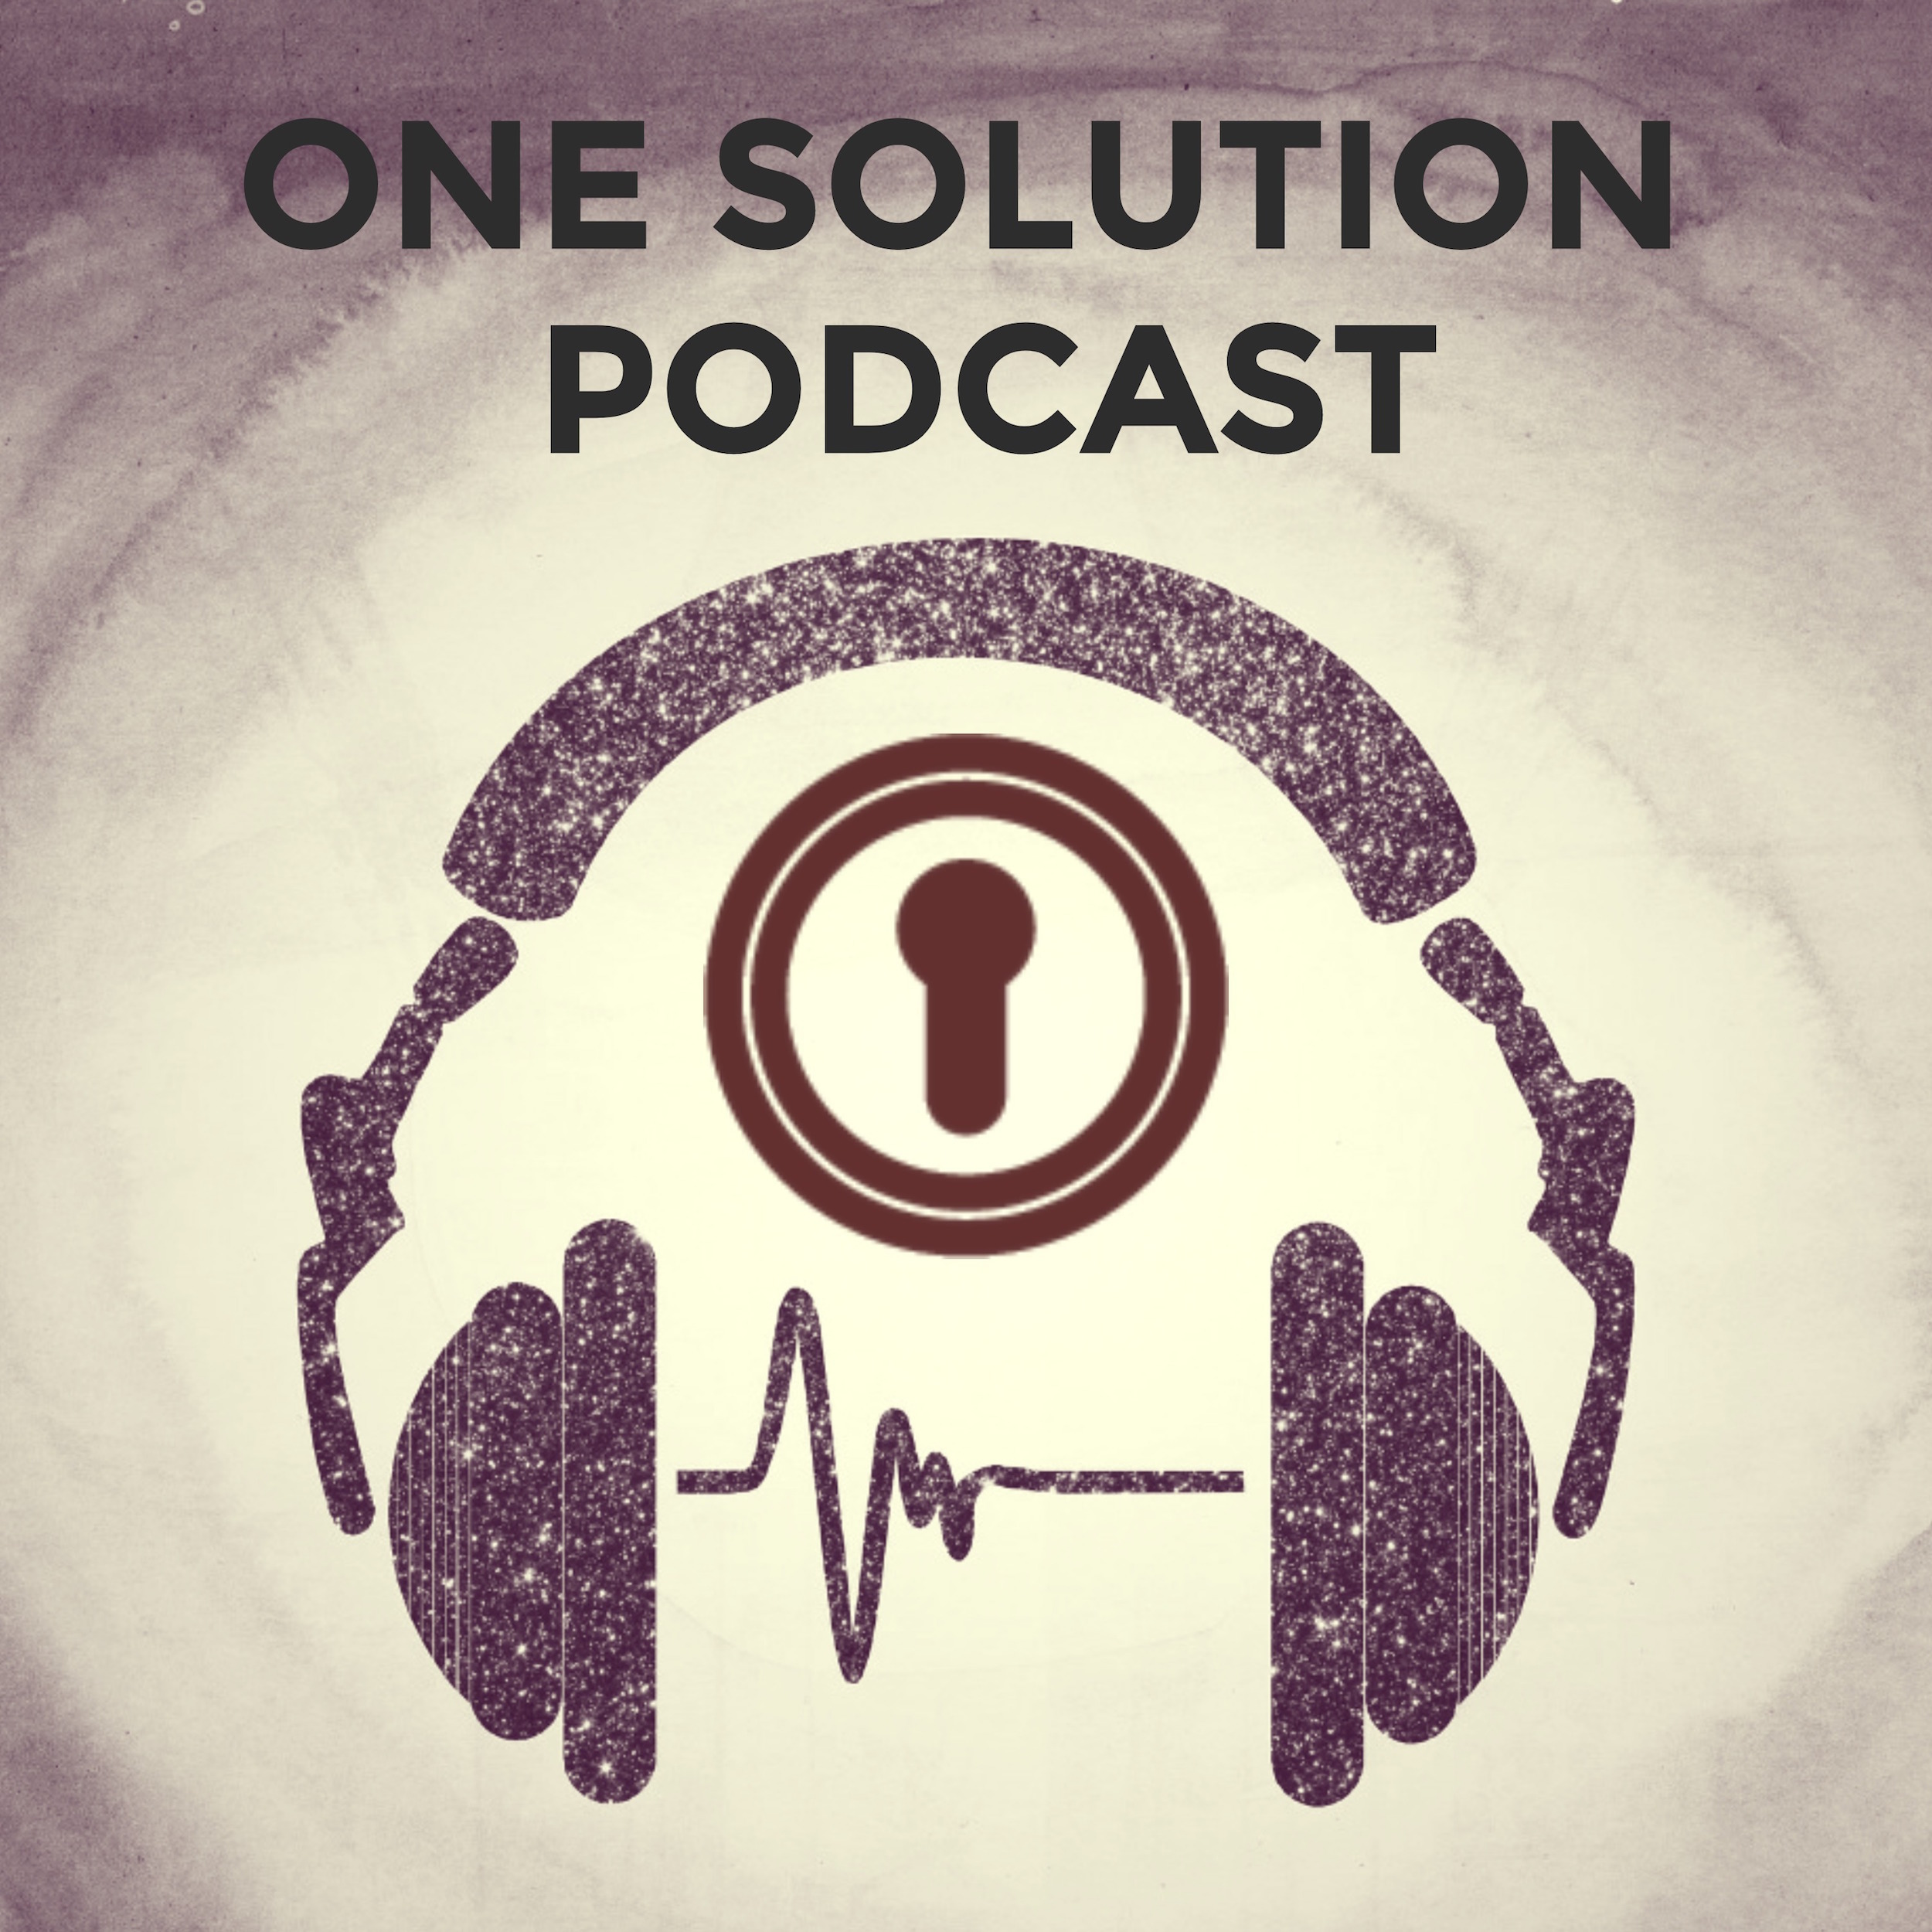 One Solution Podcast